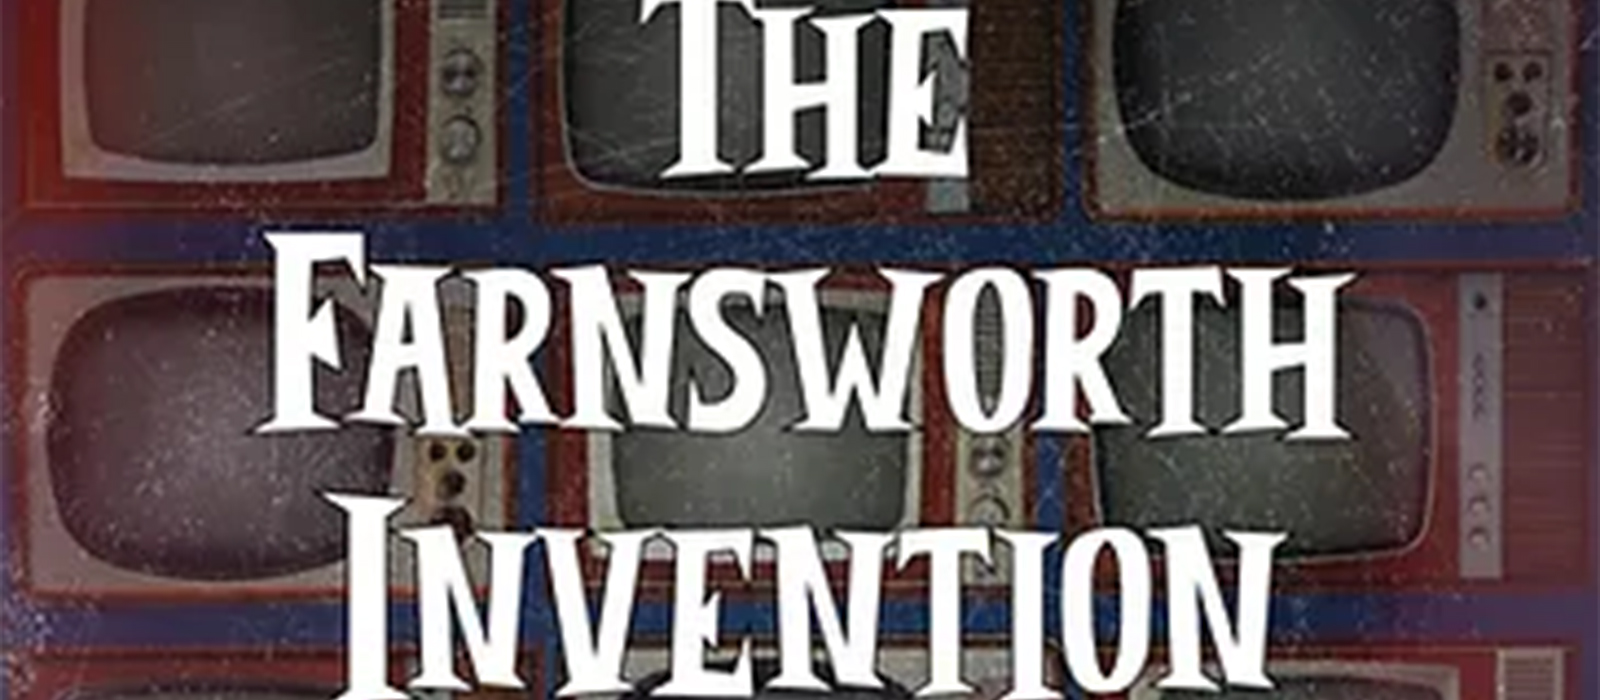 The Farnsworth Invention by Aaron Sorkin banner